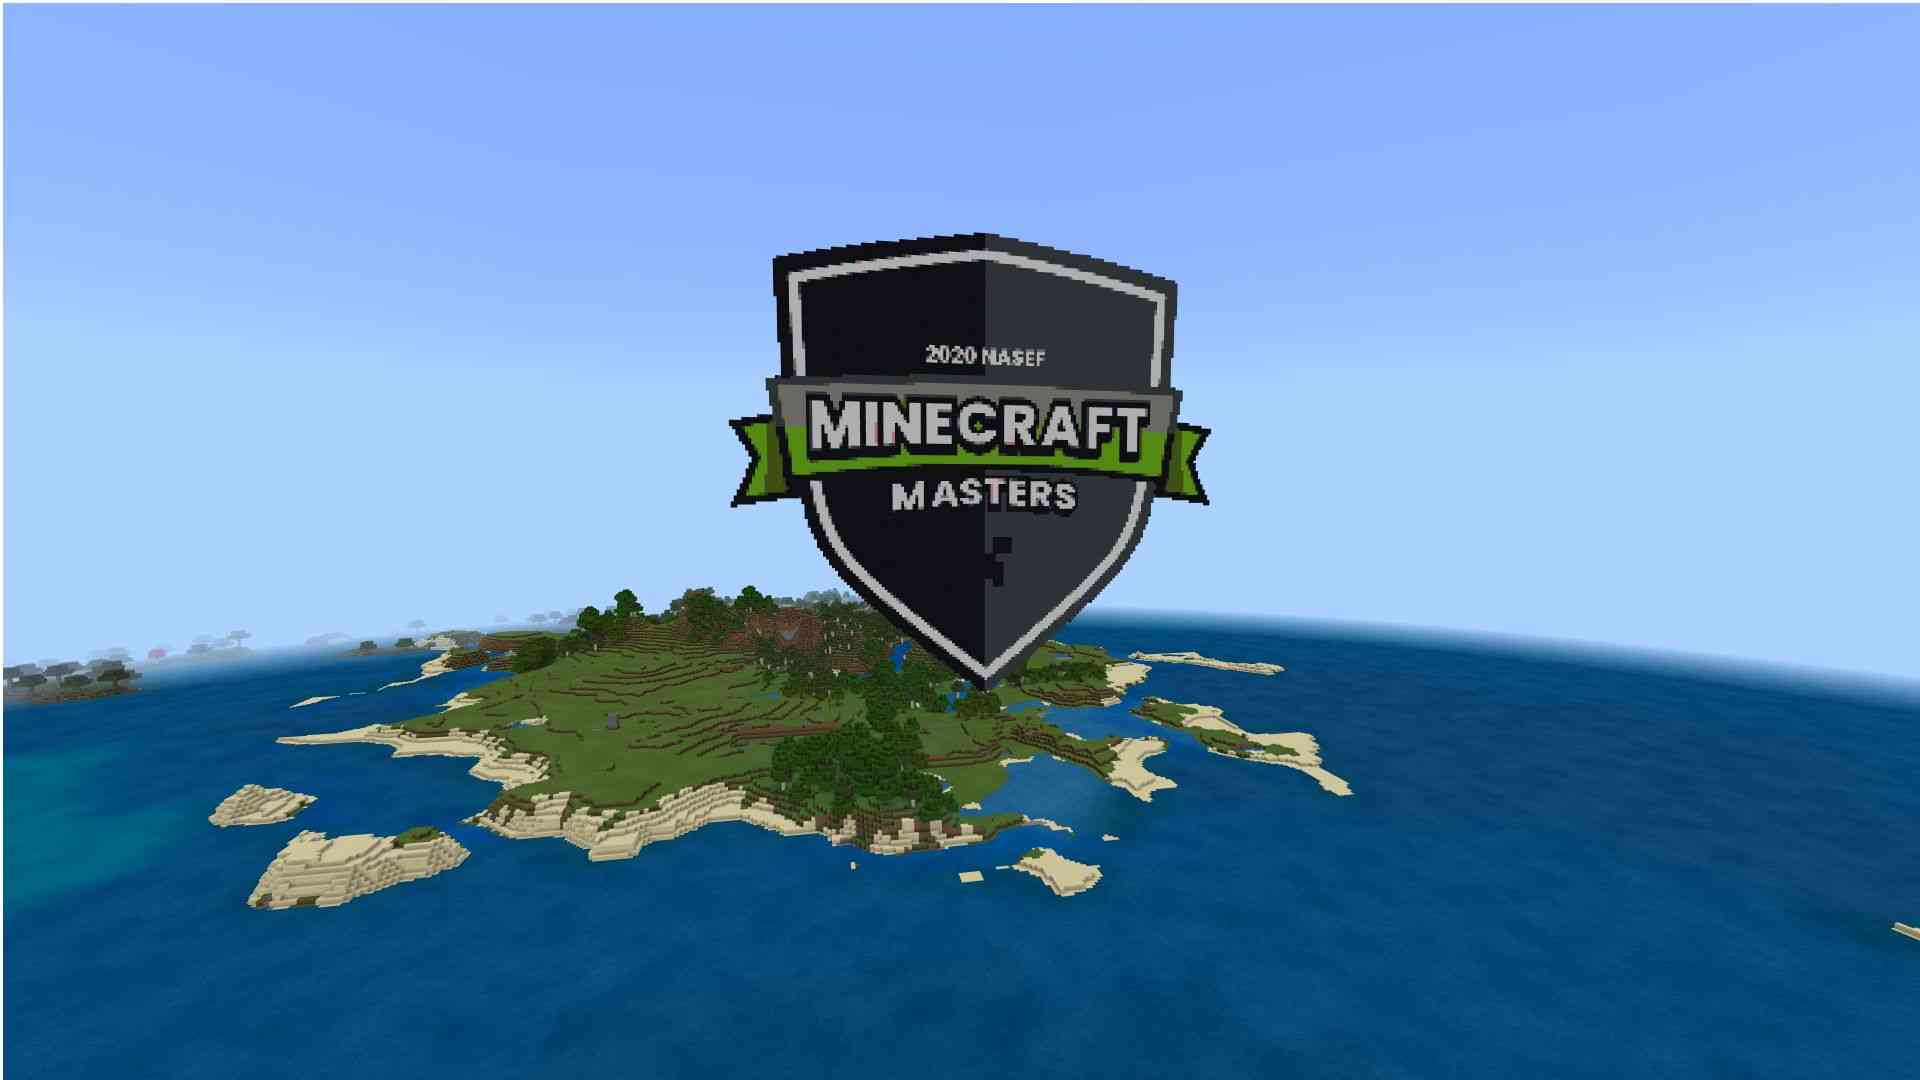 minecraft maestros will represent the uk in the minecraft masters 4441 big 1